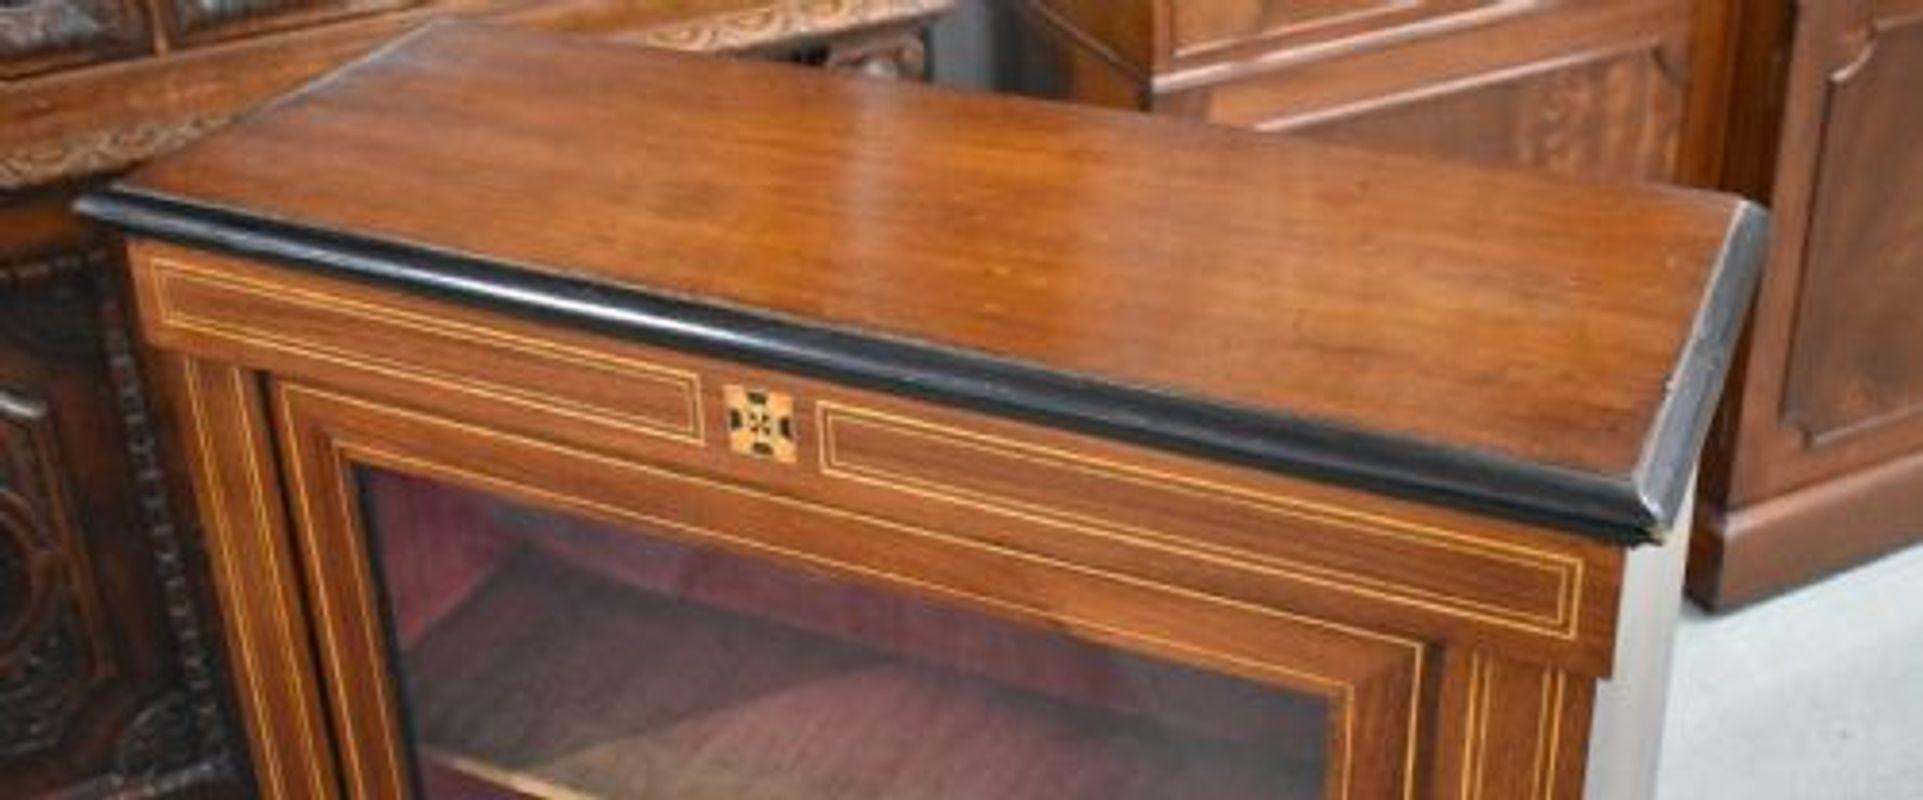 19th Century Victorian Mahogany Inlaid Pier Cabinet For Sale